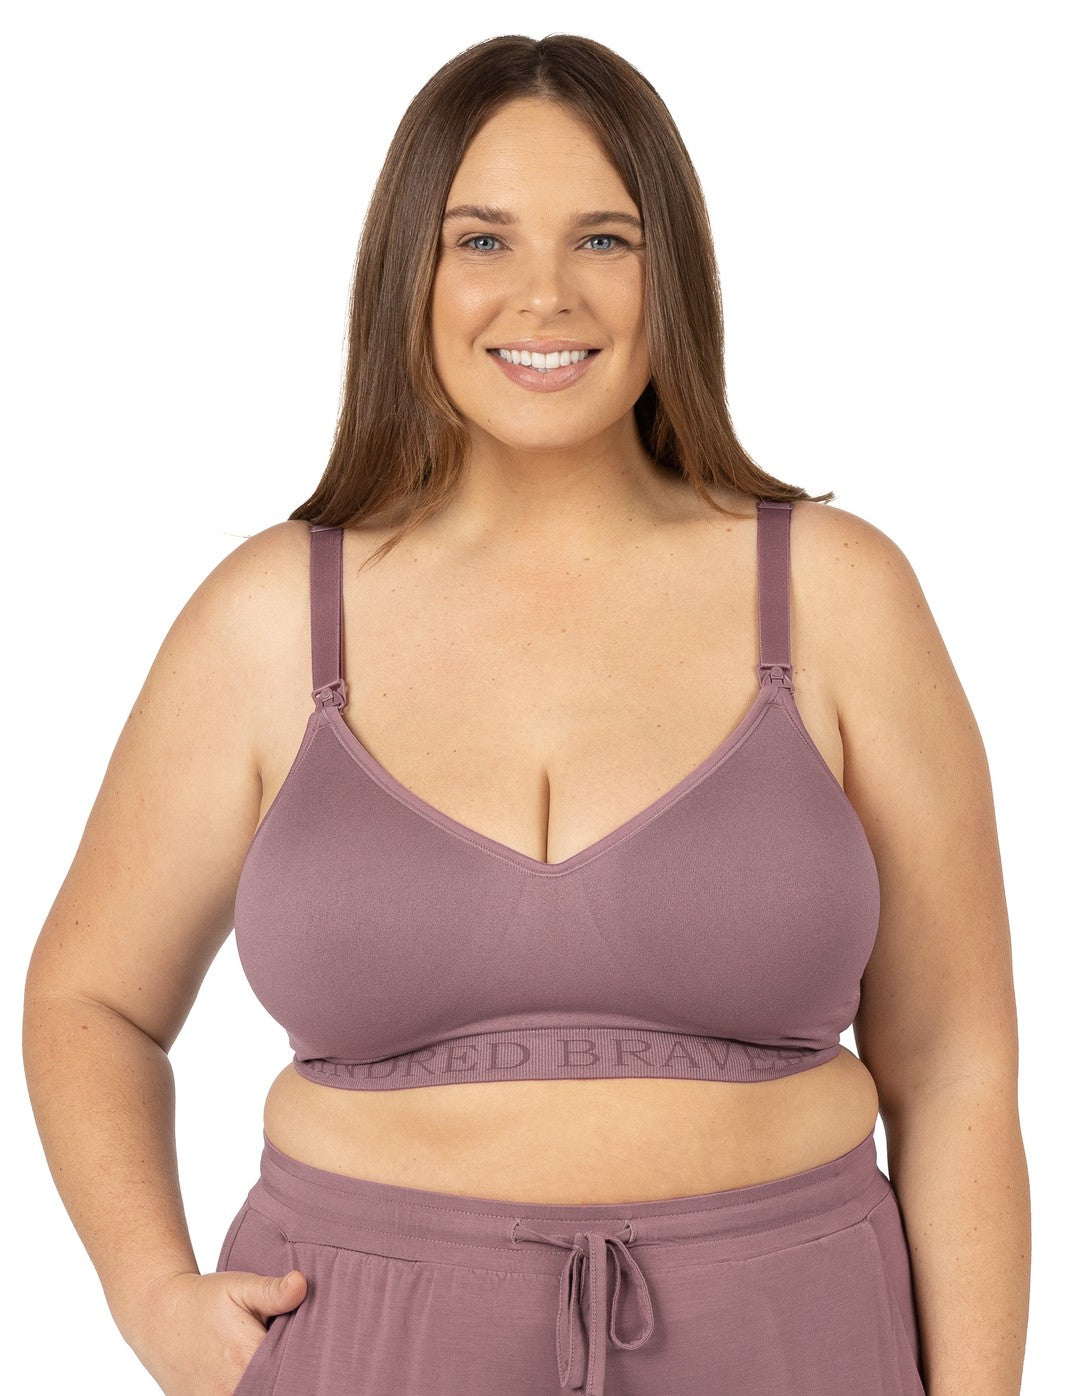 The Best Maternity & Nursing Bras For Your Changing Breasts - Best  ThirdLove Bras For During Pregnancy, Nursing & Maternity - ThirdLove